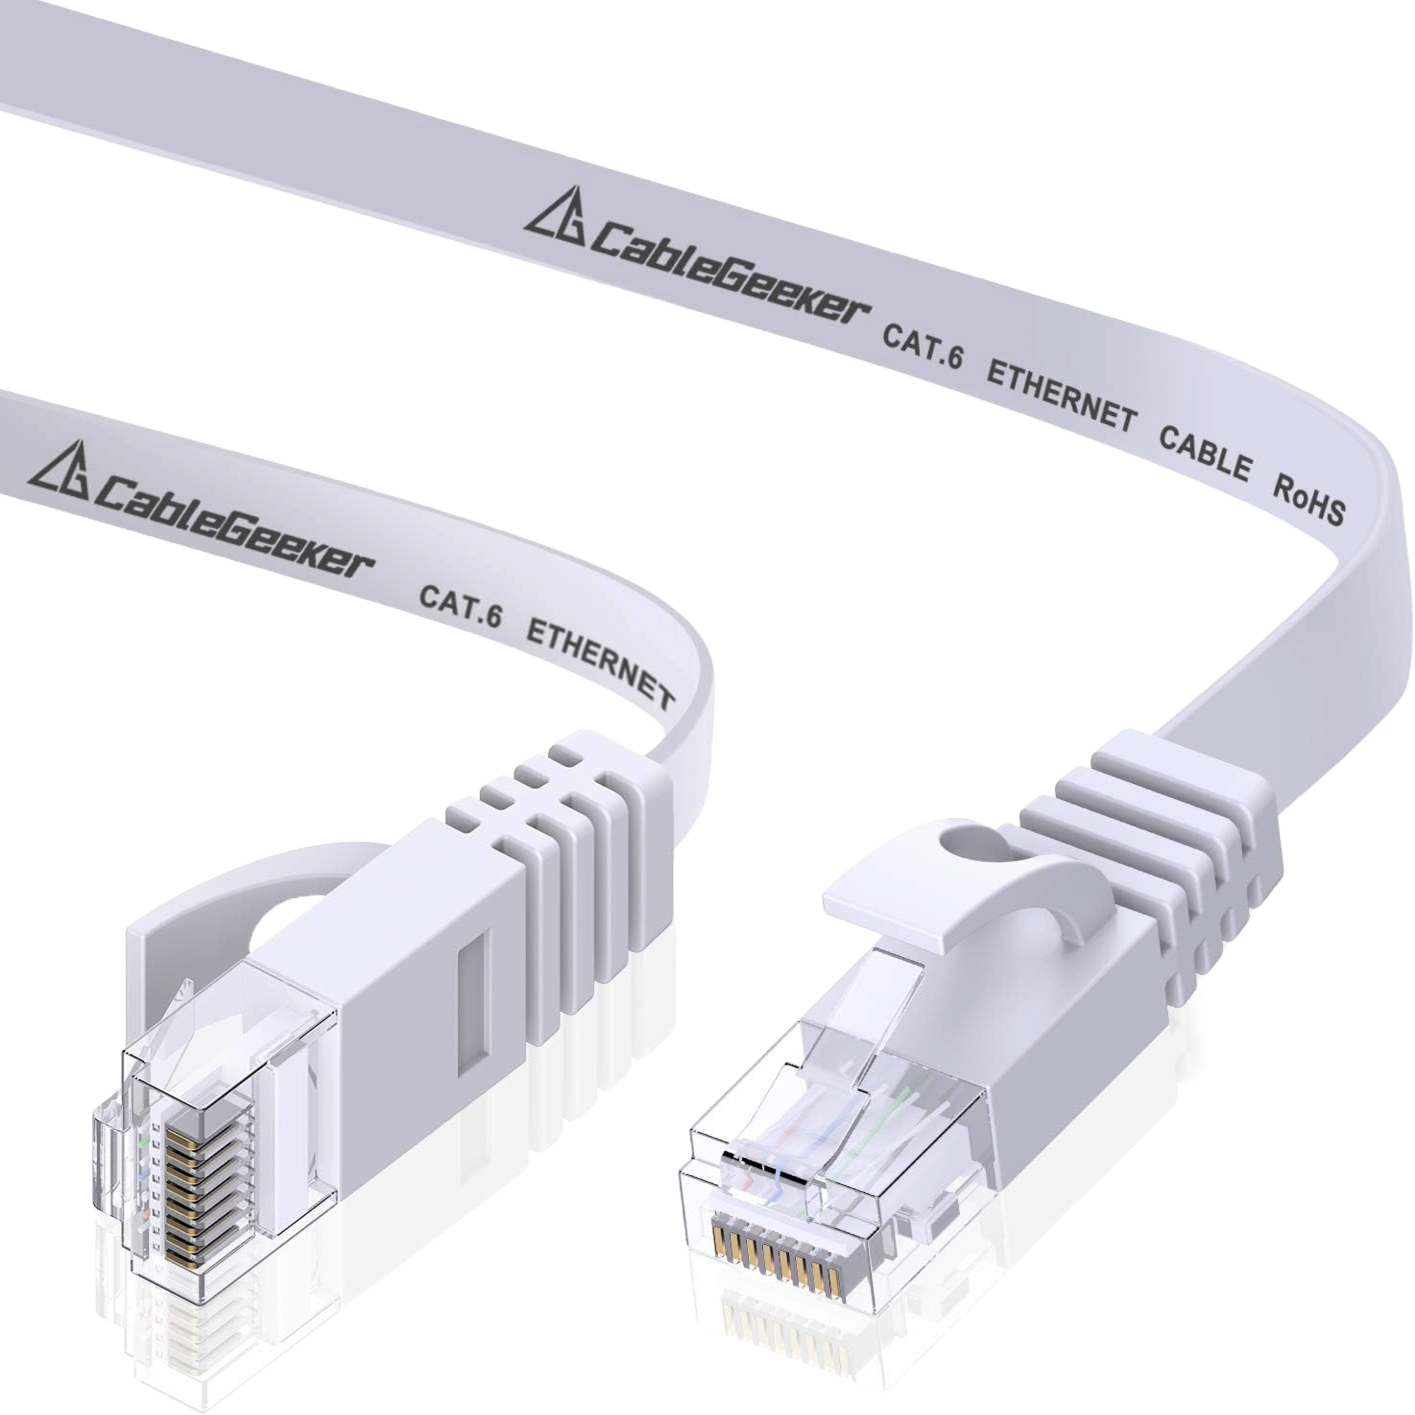 A render of the CableGeeker Cat6 flat Ethernet cable on a transparent background. 